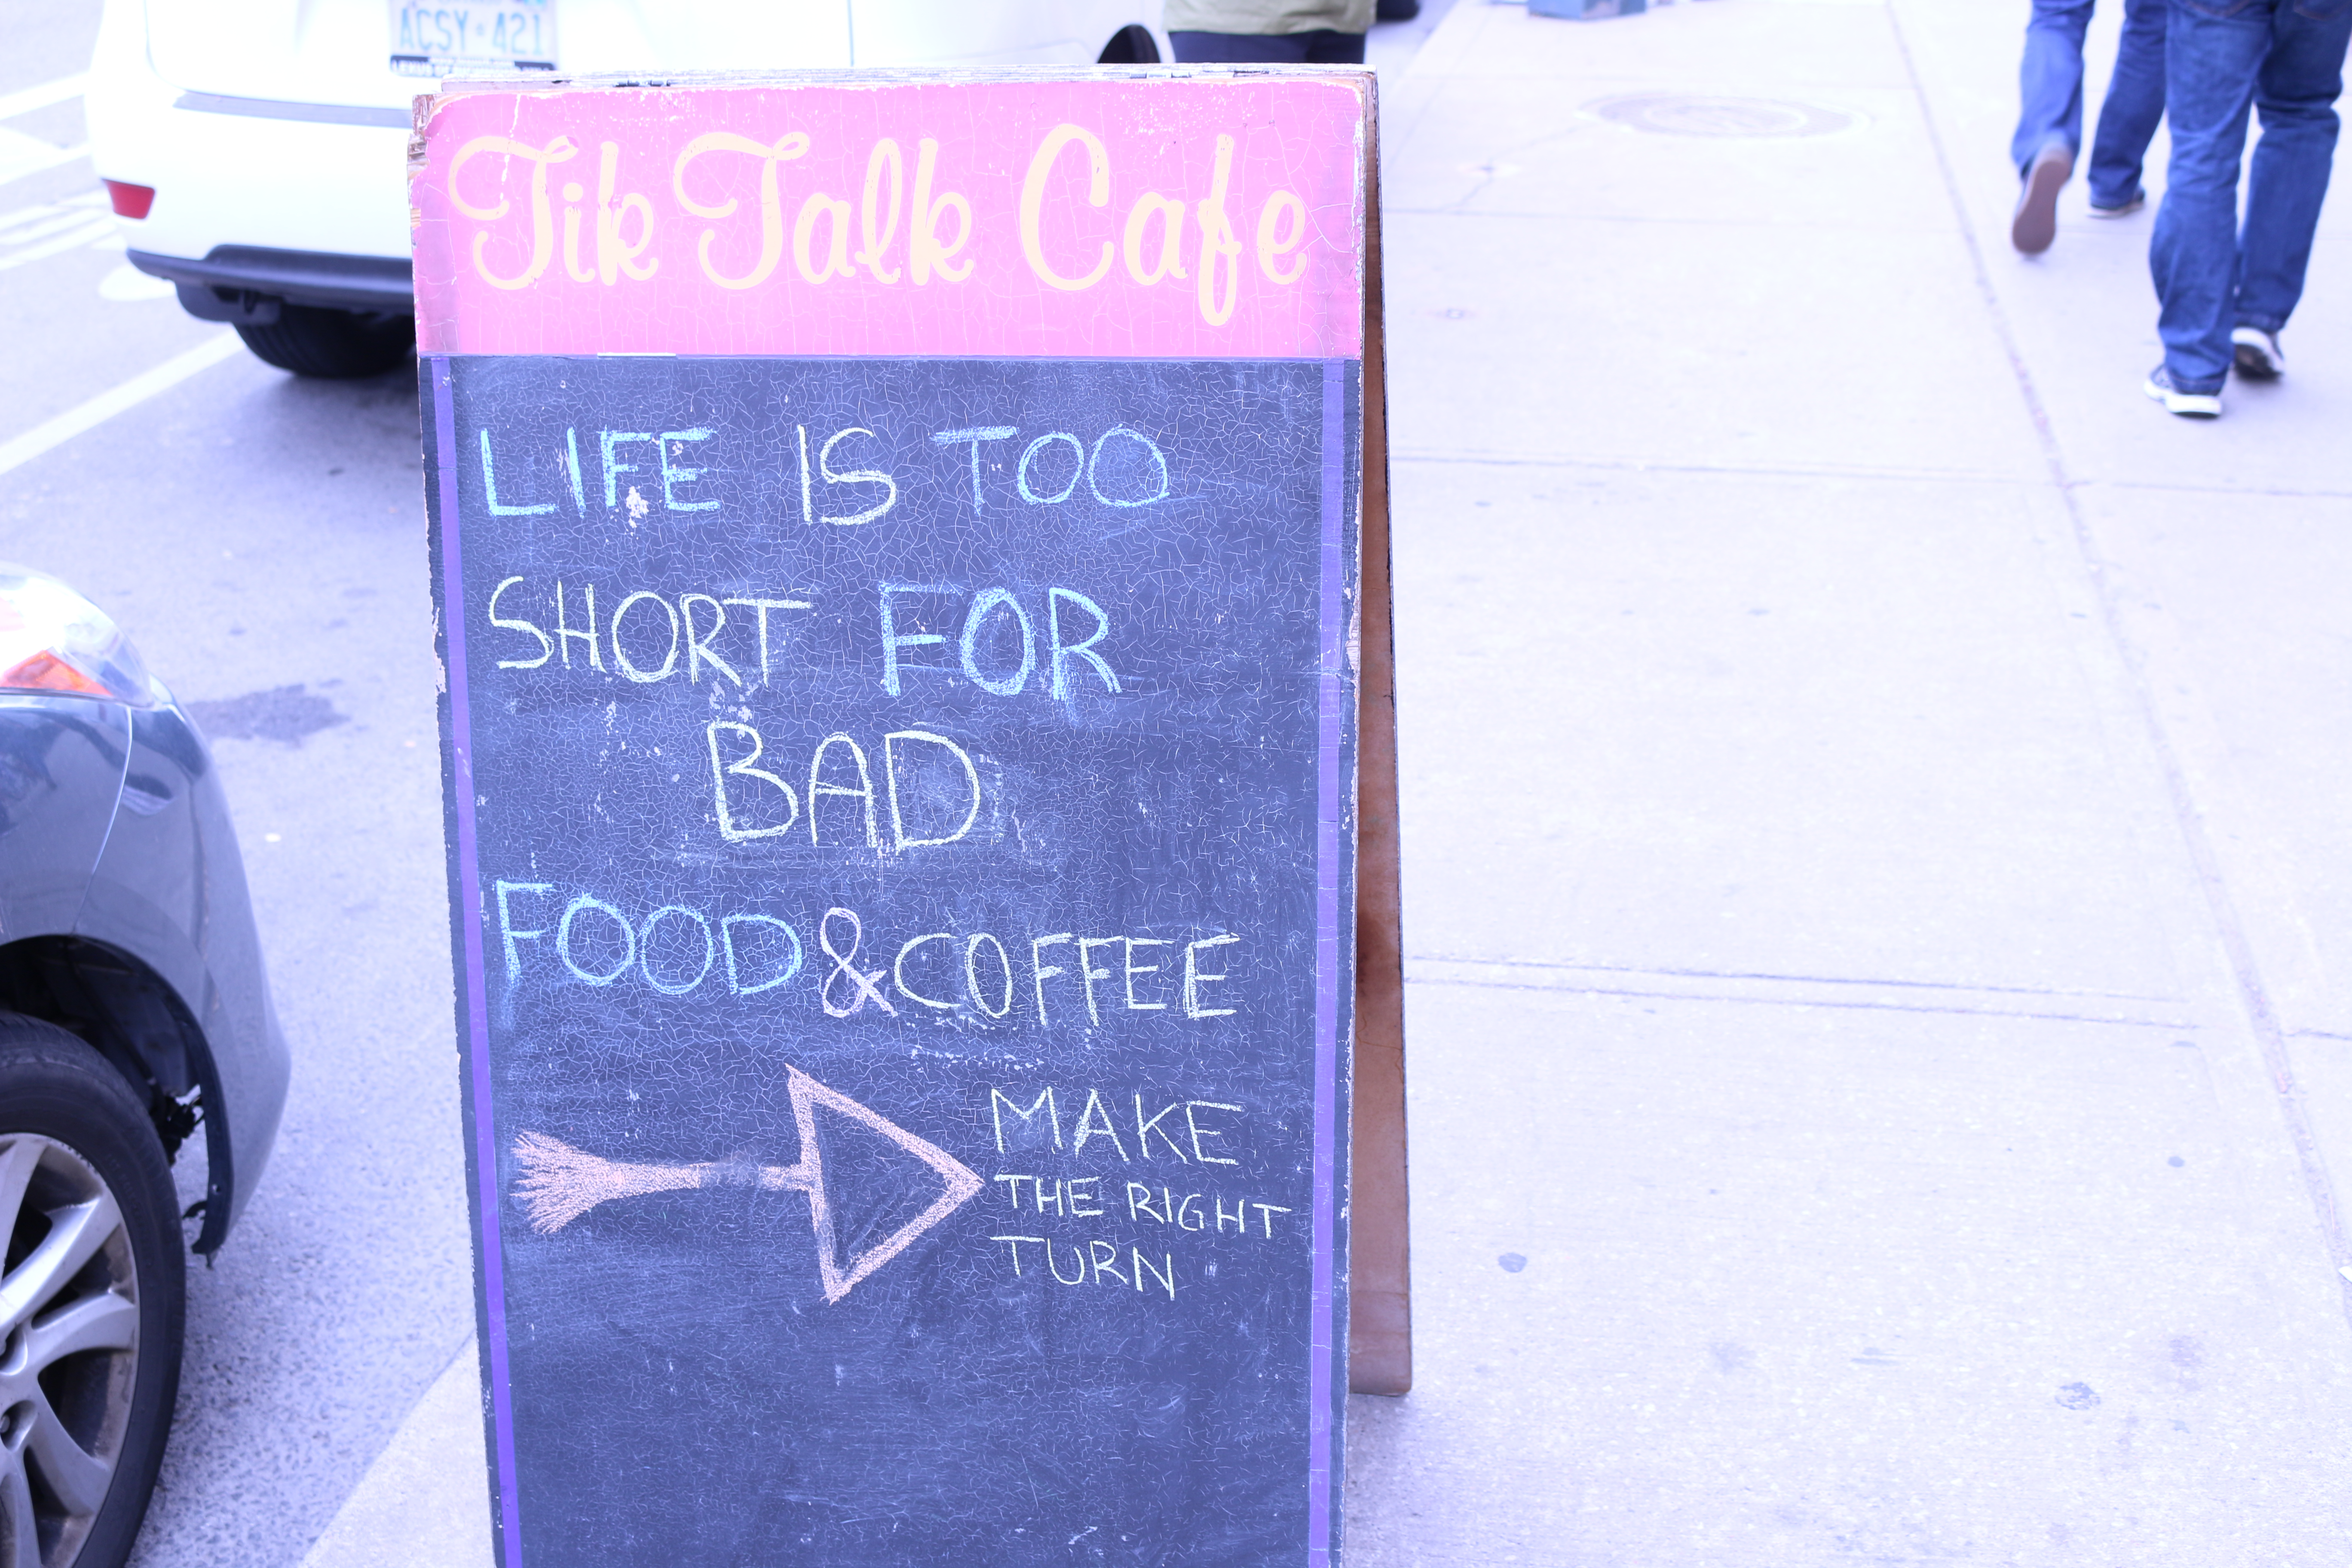 A sign outside Tik Talk Cafe that reads: "Life is too short for bad food and coffee. [arrow to the right pointing inside the cafe] Make the right turn" 